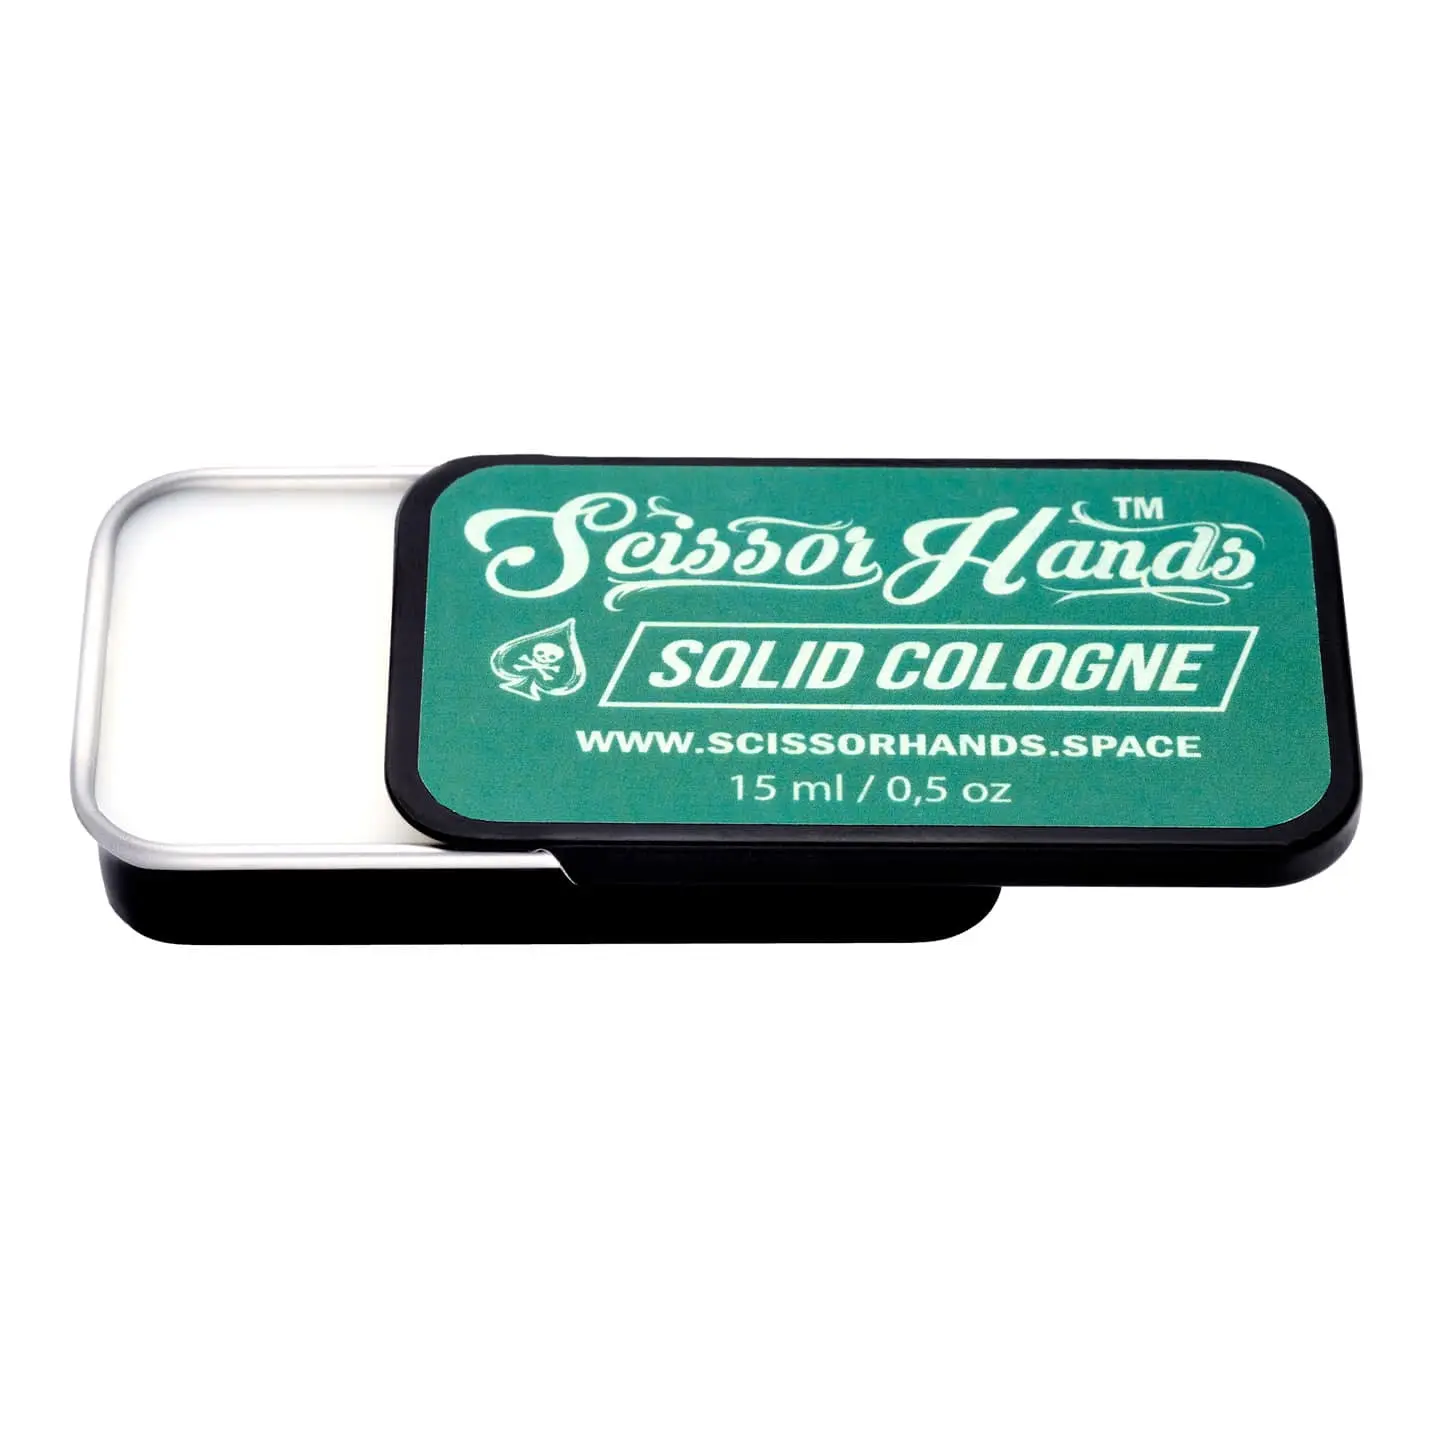 Solid cologne Green